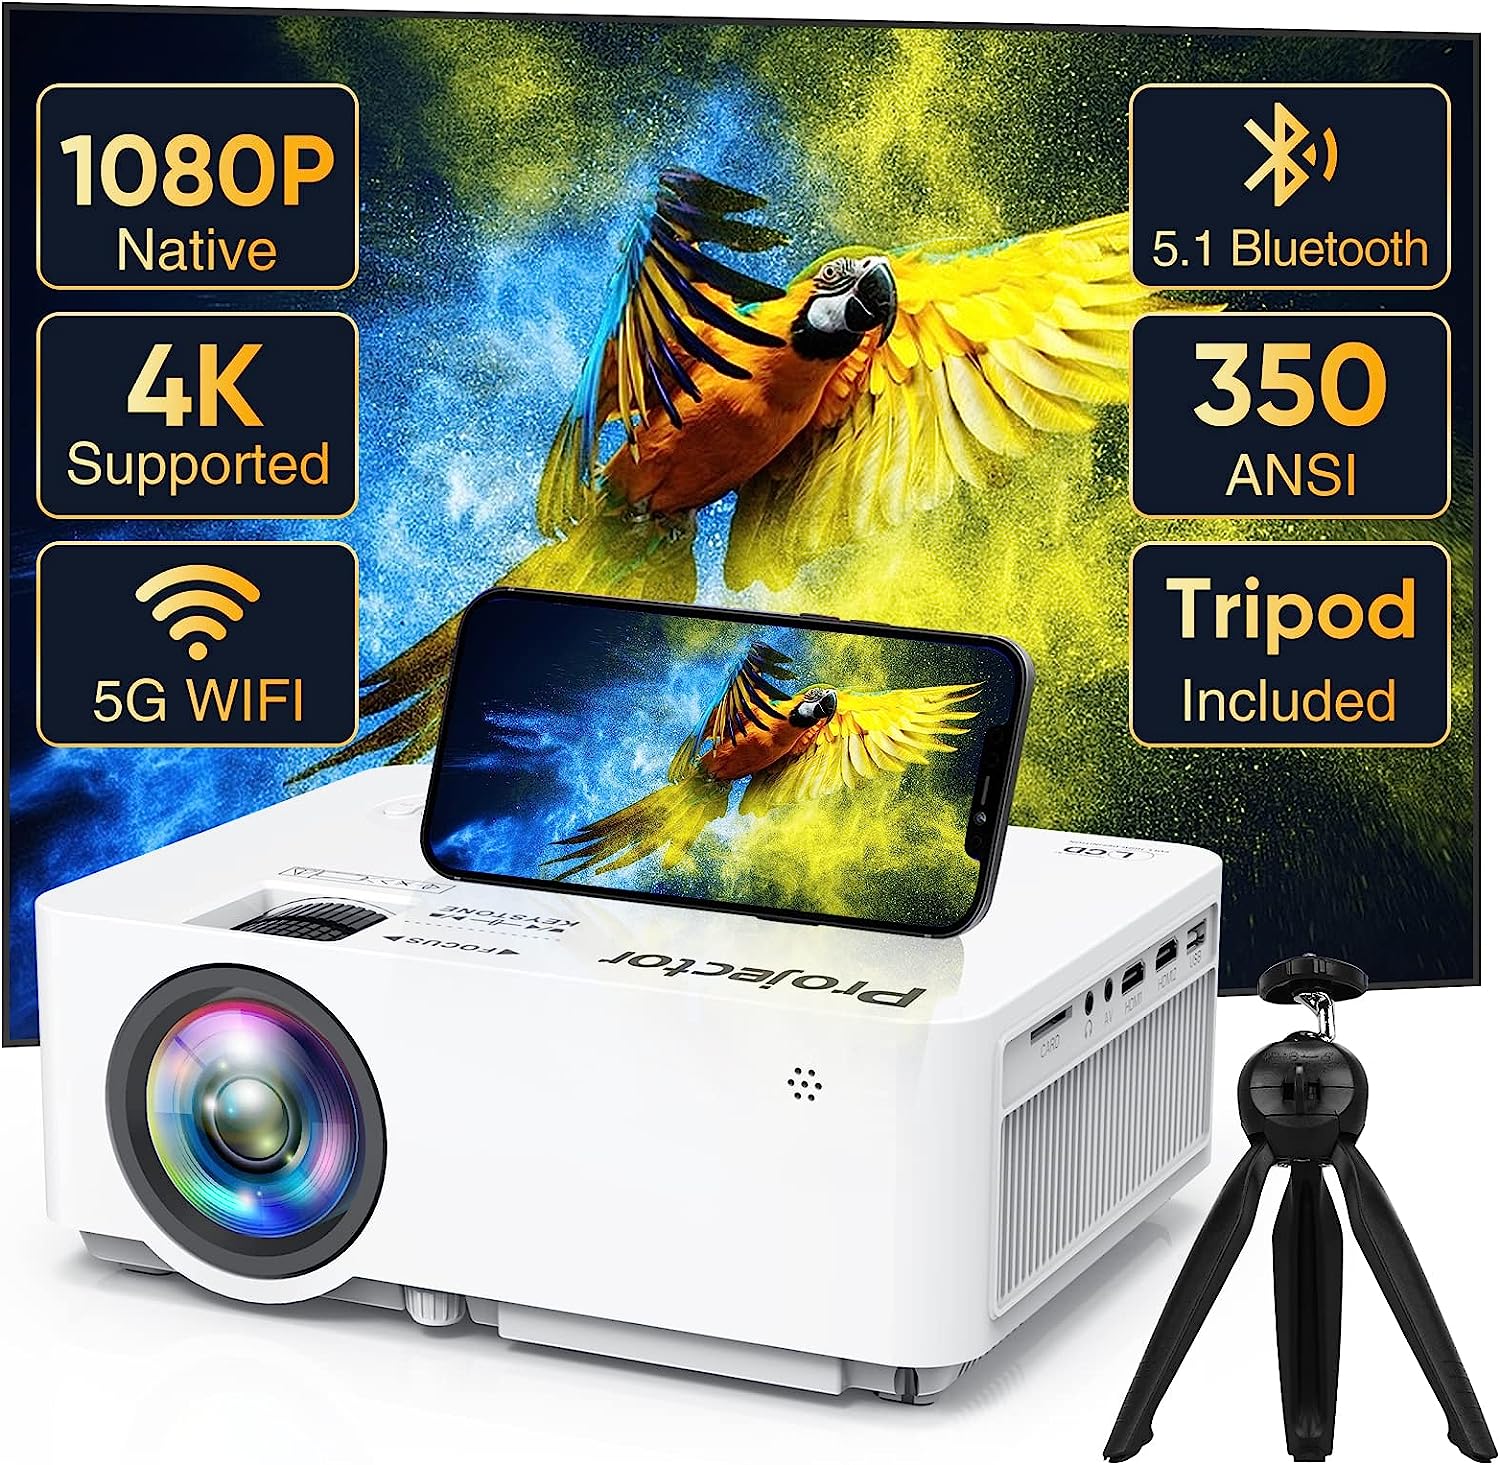 Native 1080P 5G WiFi Bluetooth Projector (with [...]